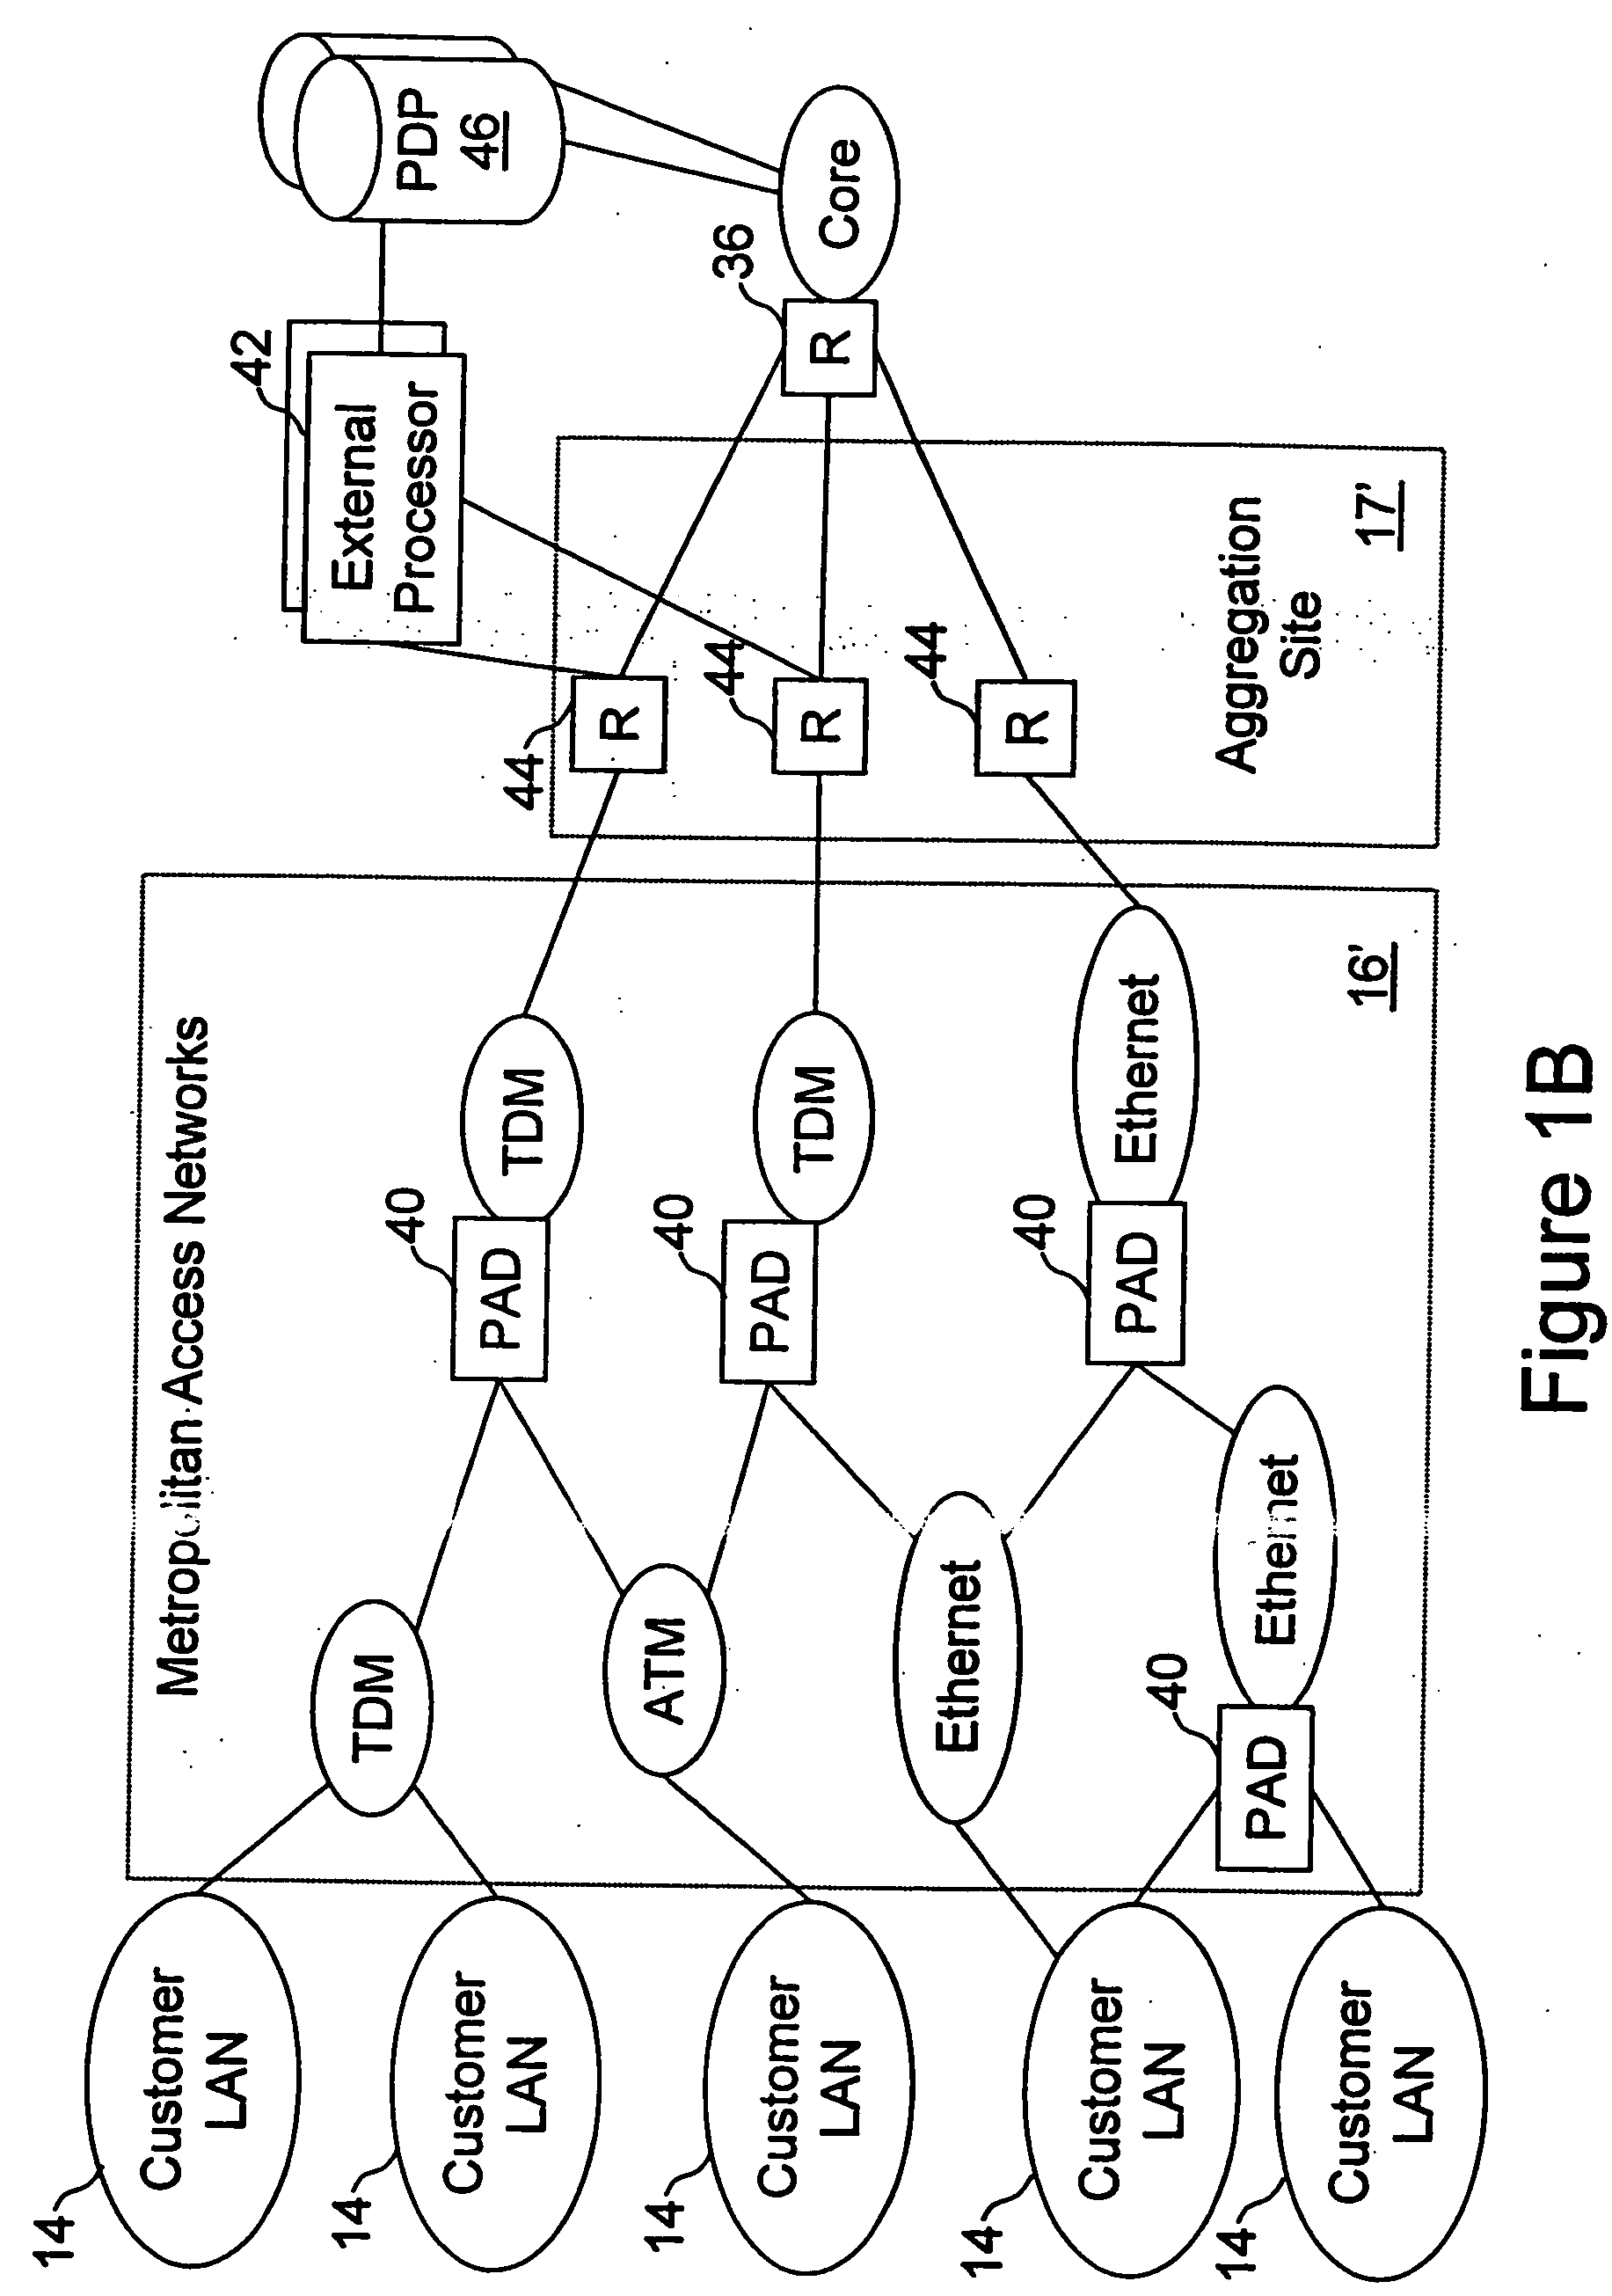 Network access system including a programmable access device having distributed service control